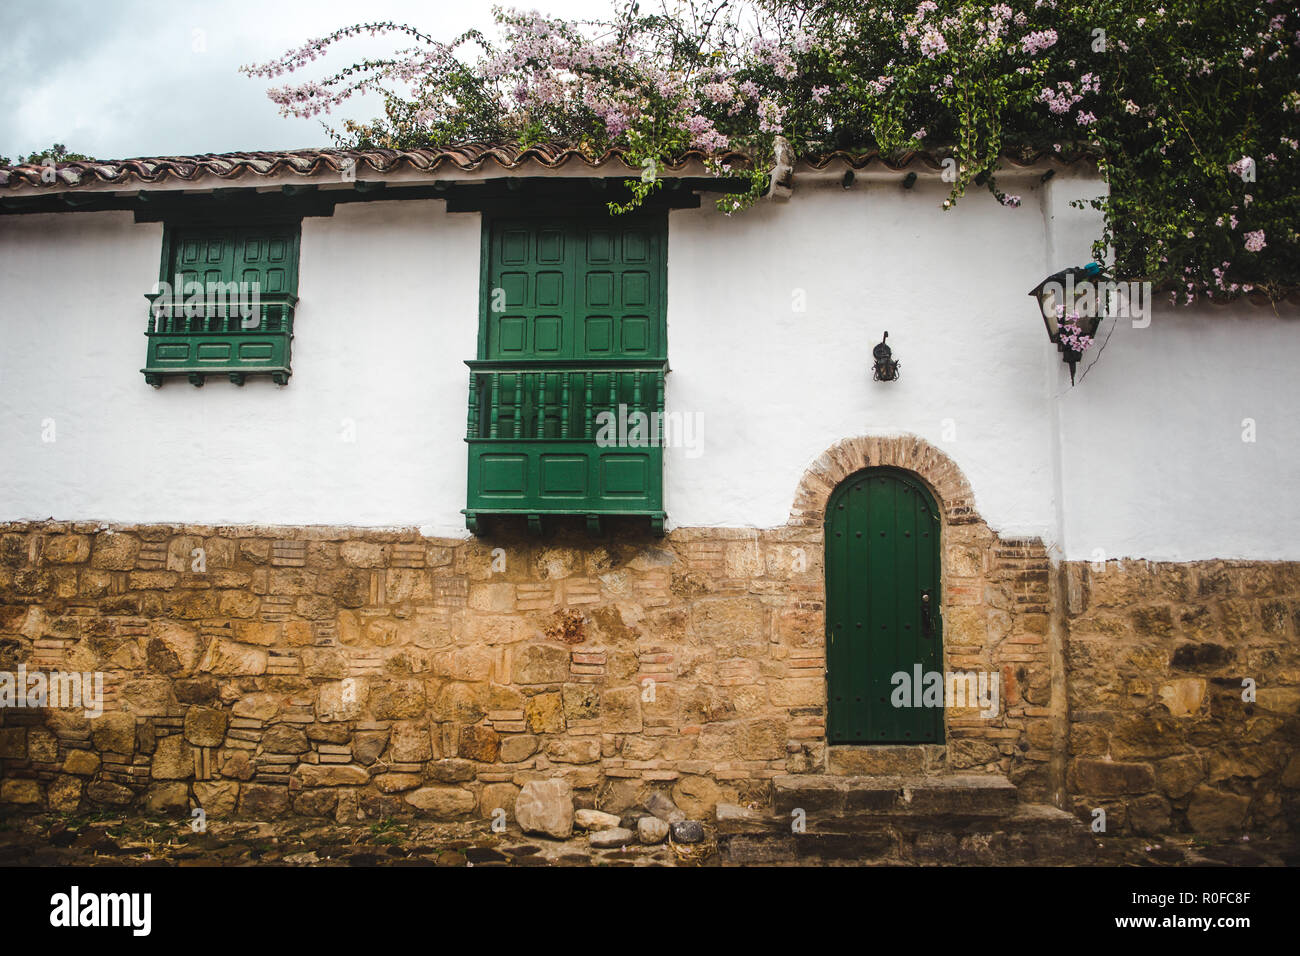 Typical Spanish colonial architecture in Villa de Leyva, an authentic pueblo / small town and popular tourist destination in Boyacá Colombia Stock Photo